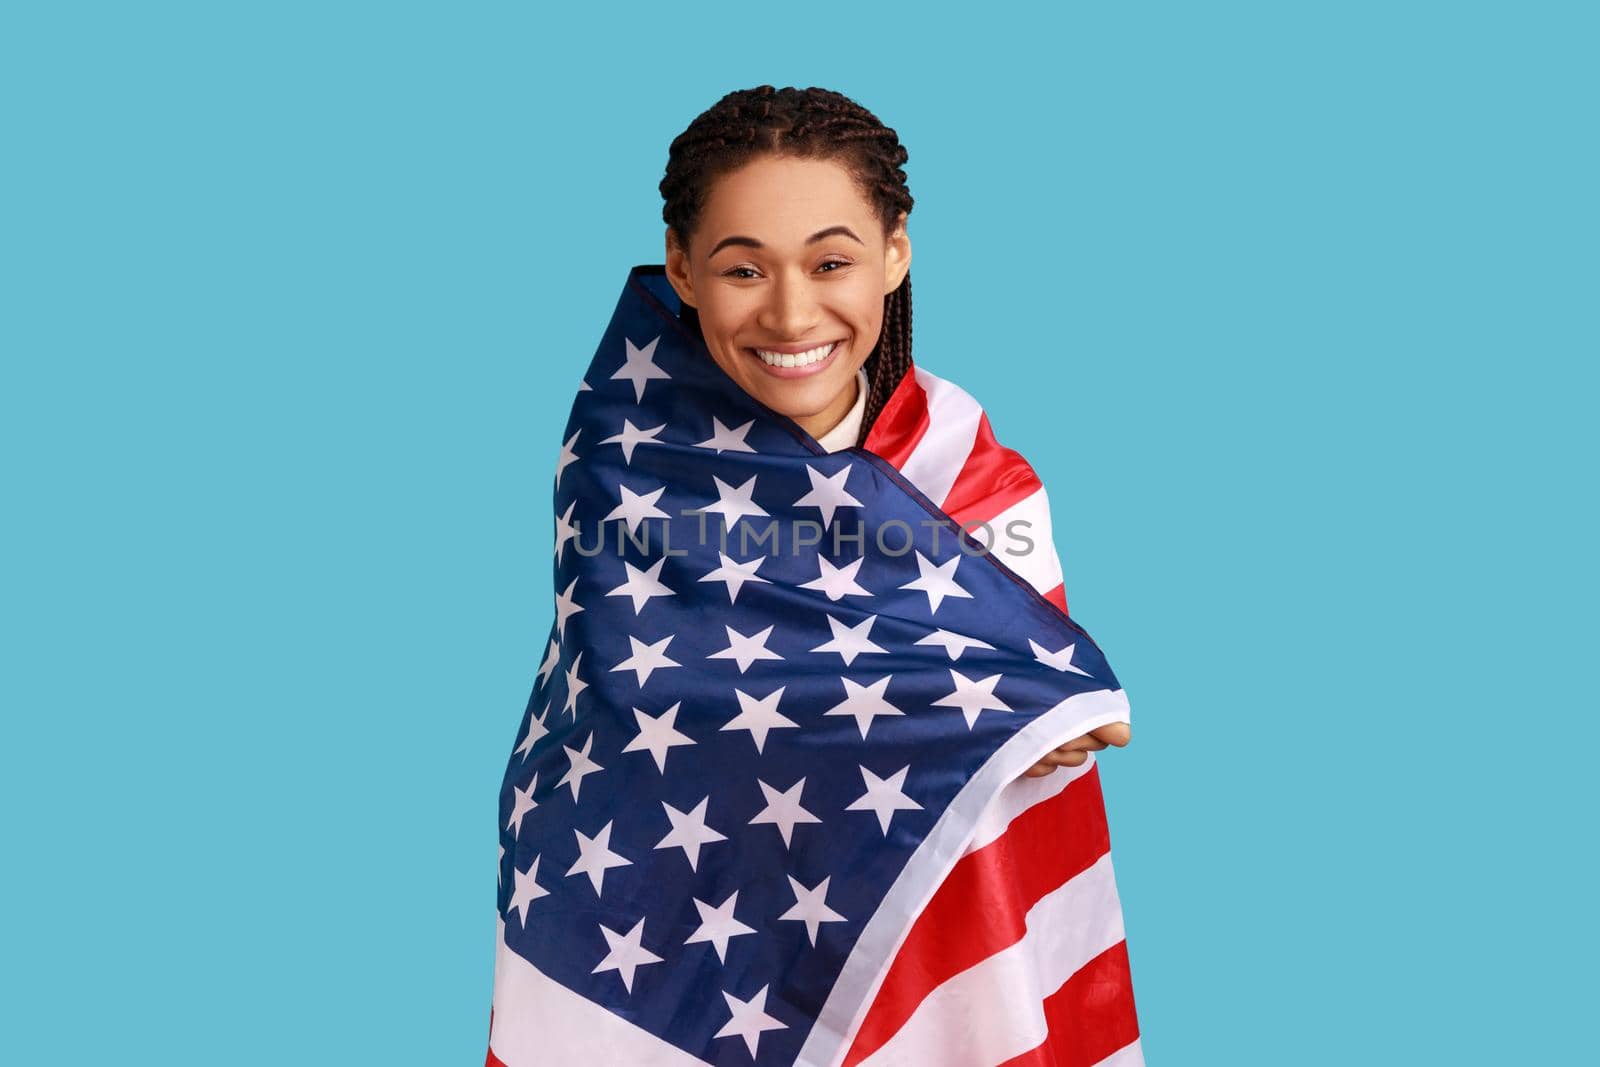 Happy relaxed satisfied woman with dreadlocks standing wrapped in USA flag, celebrating national holiday, posing with toothy smile, wearing white shirt. Indoor studio shot isolated on blue background.